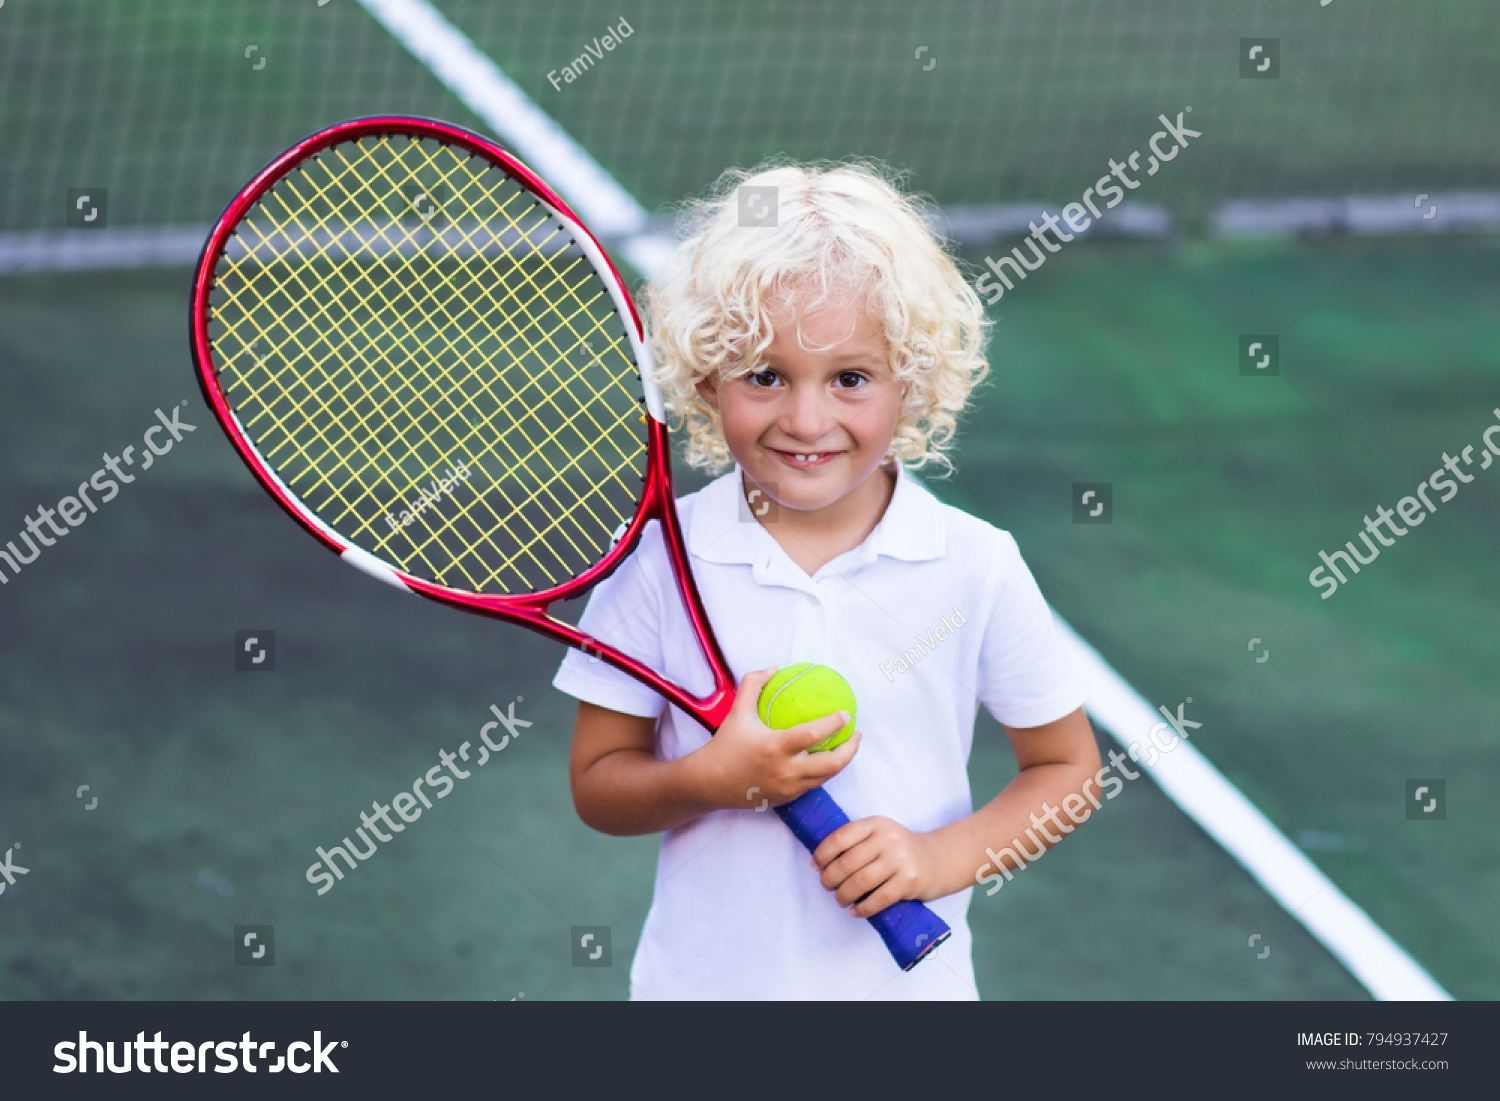 Child playing tennis on outdoor court. Little boy with tennis racket and ball in sport club. Active exercise for kids. Summer activities for children. Training for young kid. Child learning to play. #794937427